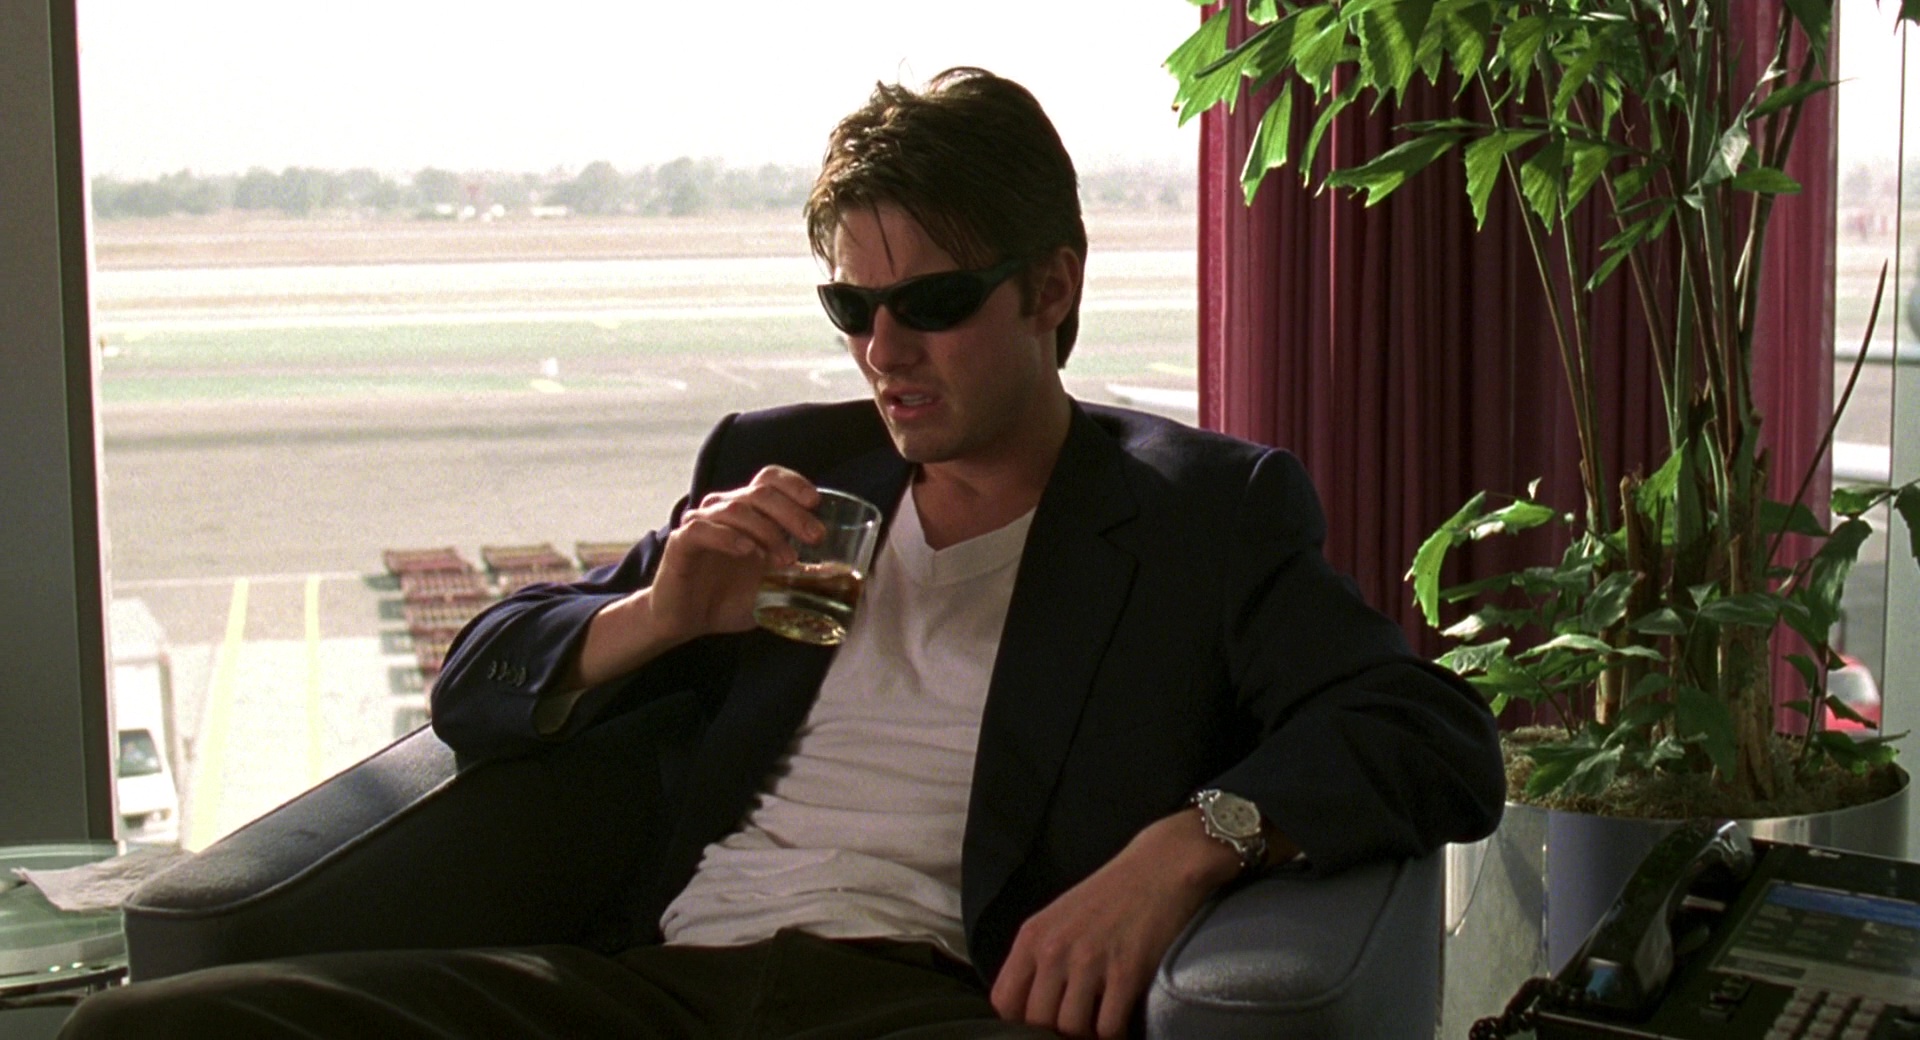 Arnette Sunglasses (Model: Raven) Worn By Tom Cruise In Jerry Maguire (1996)